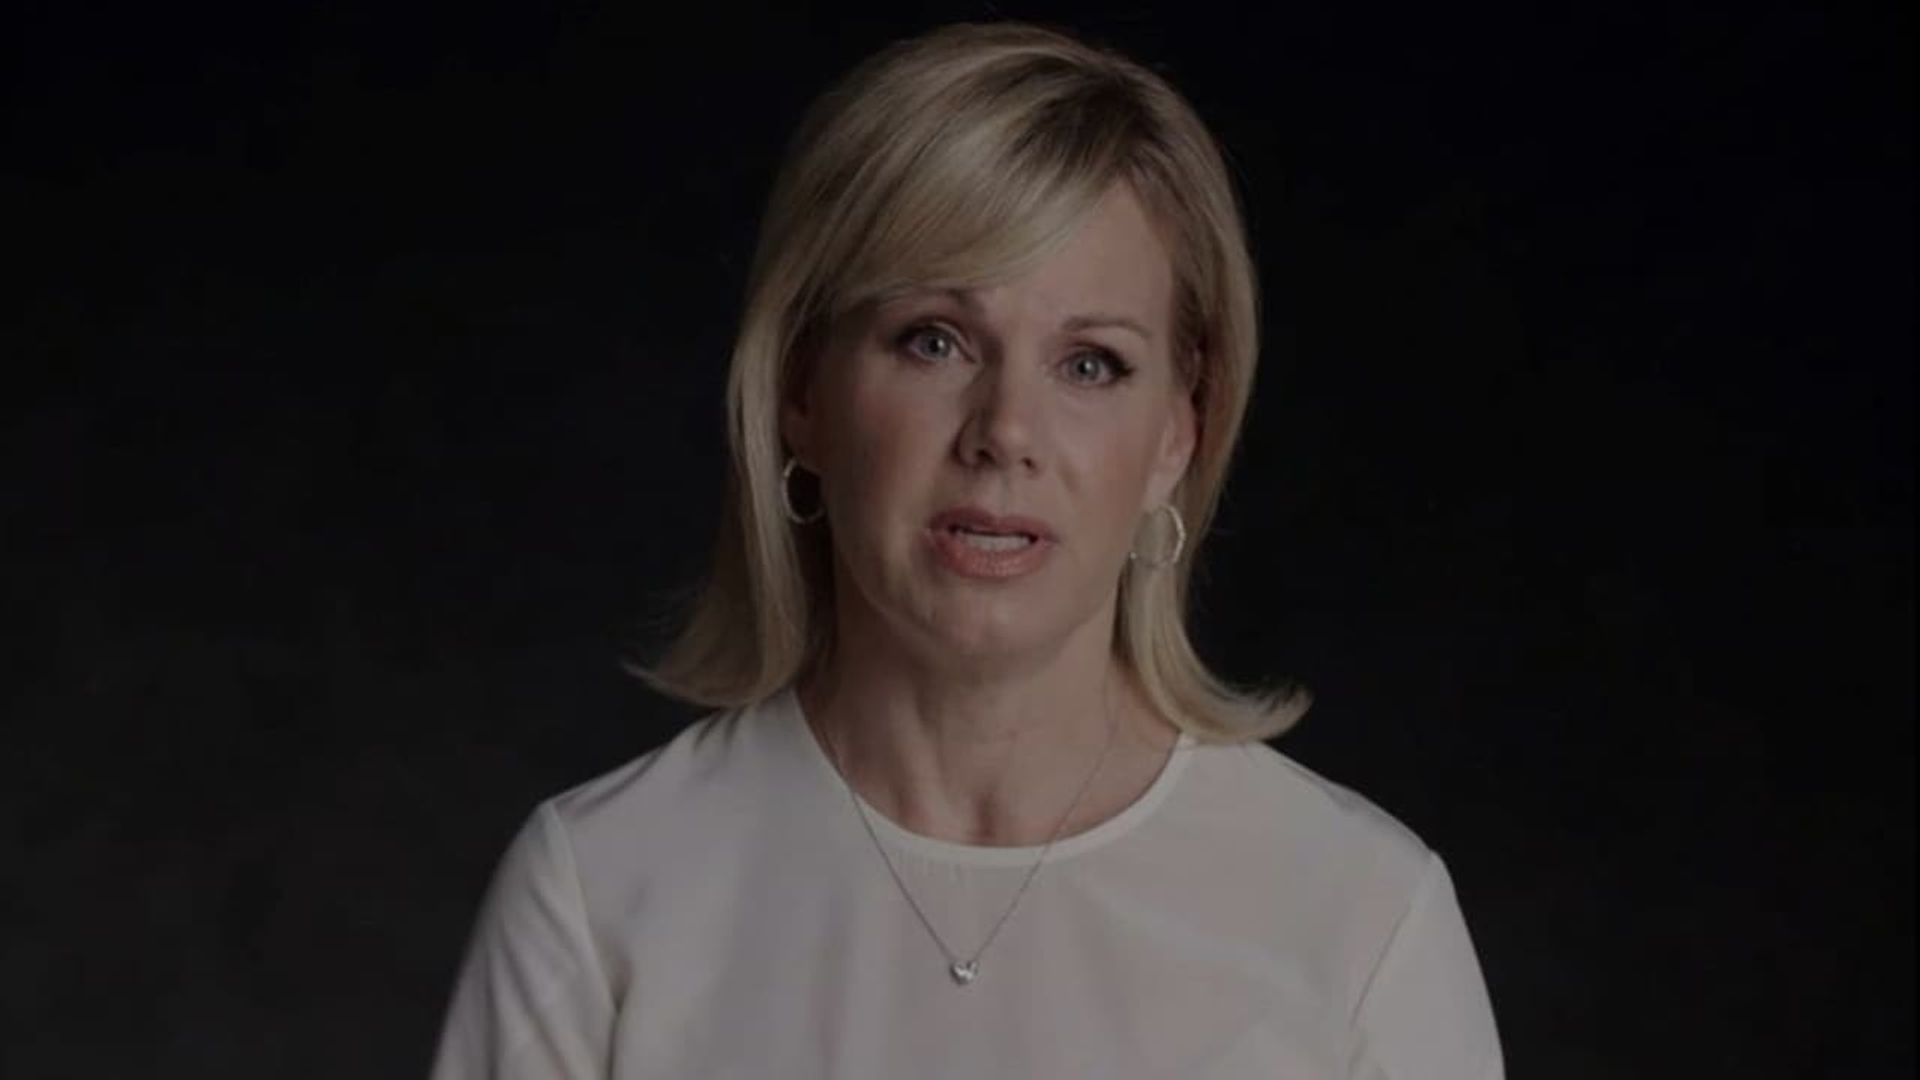 Gretchen Carlson: Breaking the Silence background